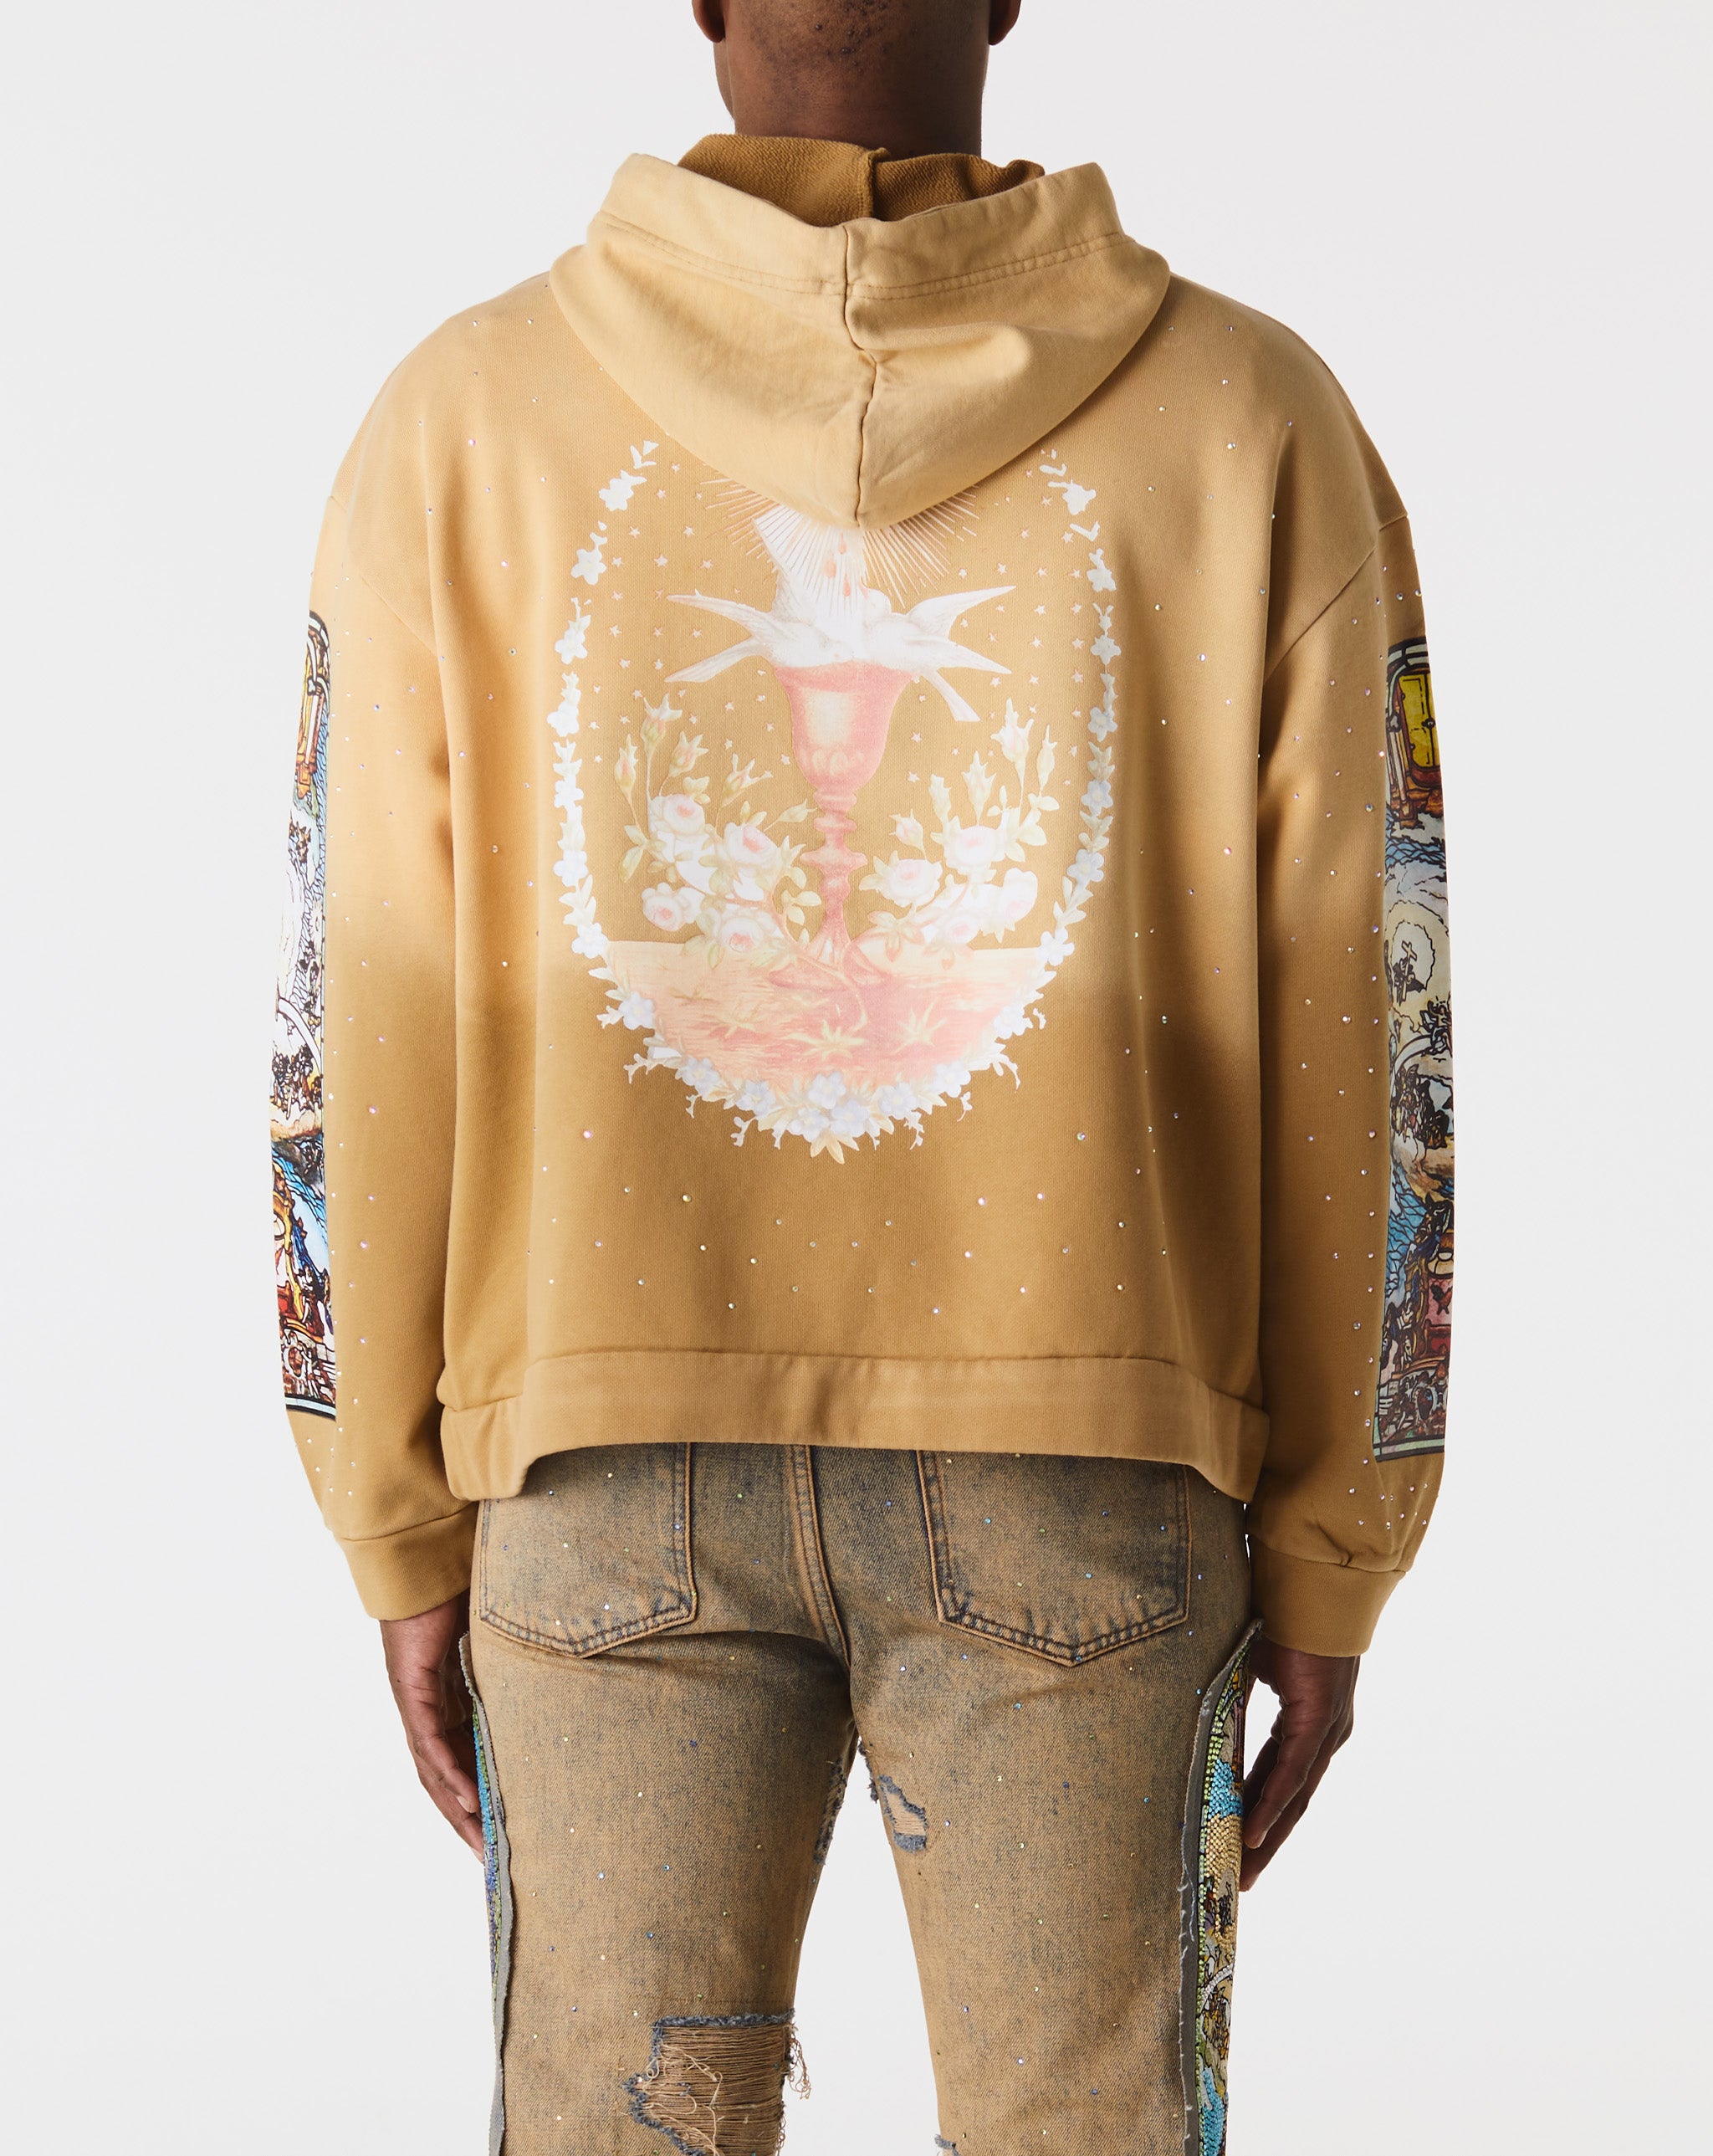 Who Decides War Chalice Embroidered Hoodie  - Cheap Urlfreeze Jordan outlet